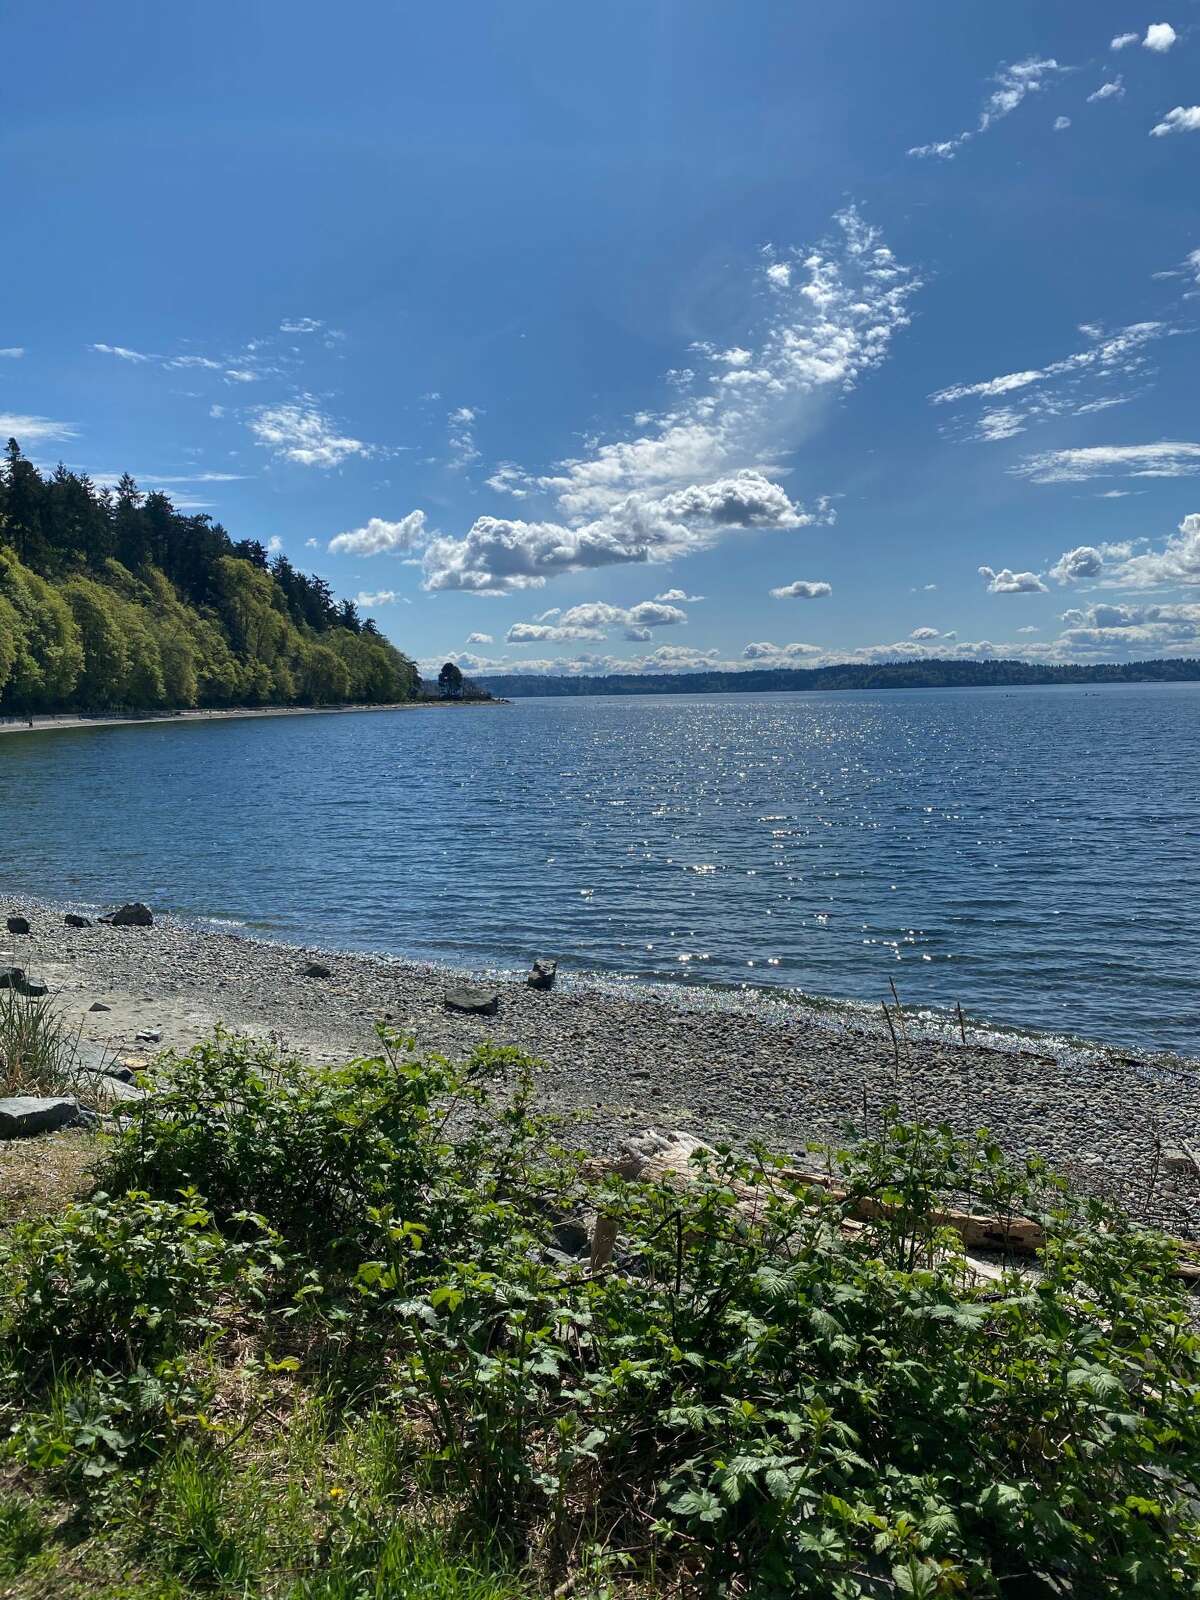 A sunny day at Lincoln Park in West Seattle, Wash. on April 19, 2020.